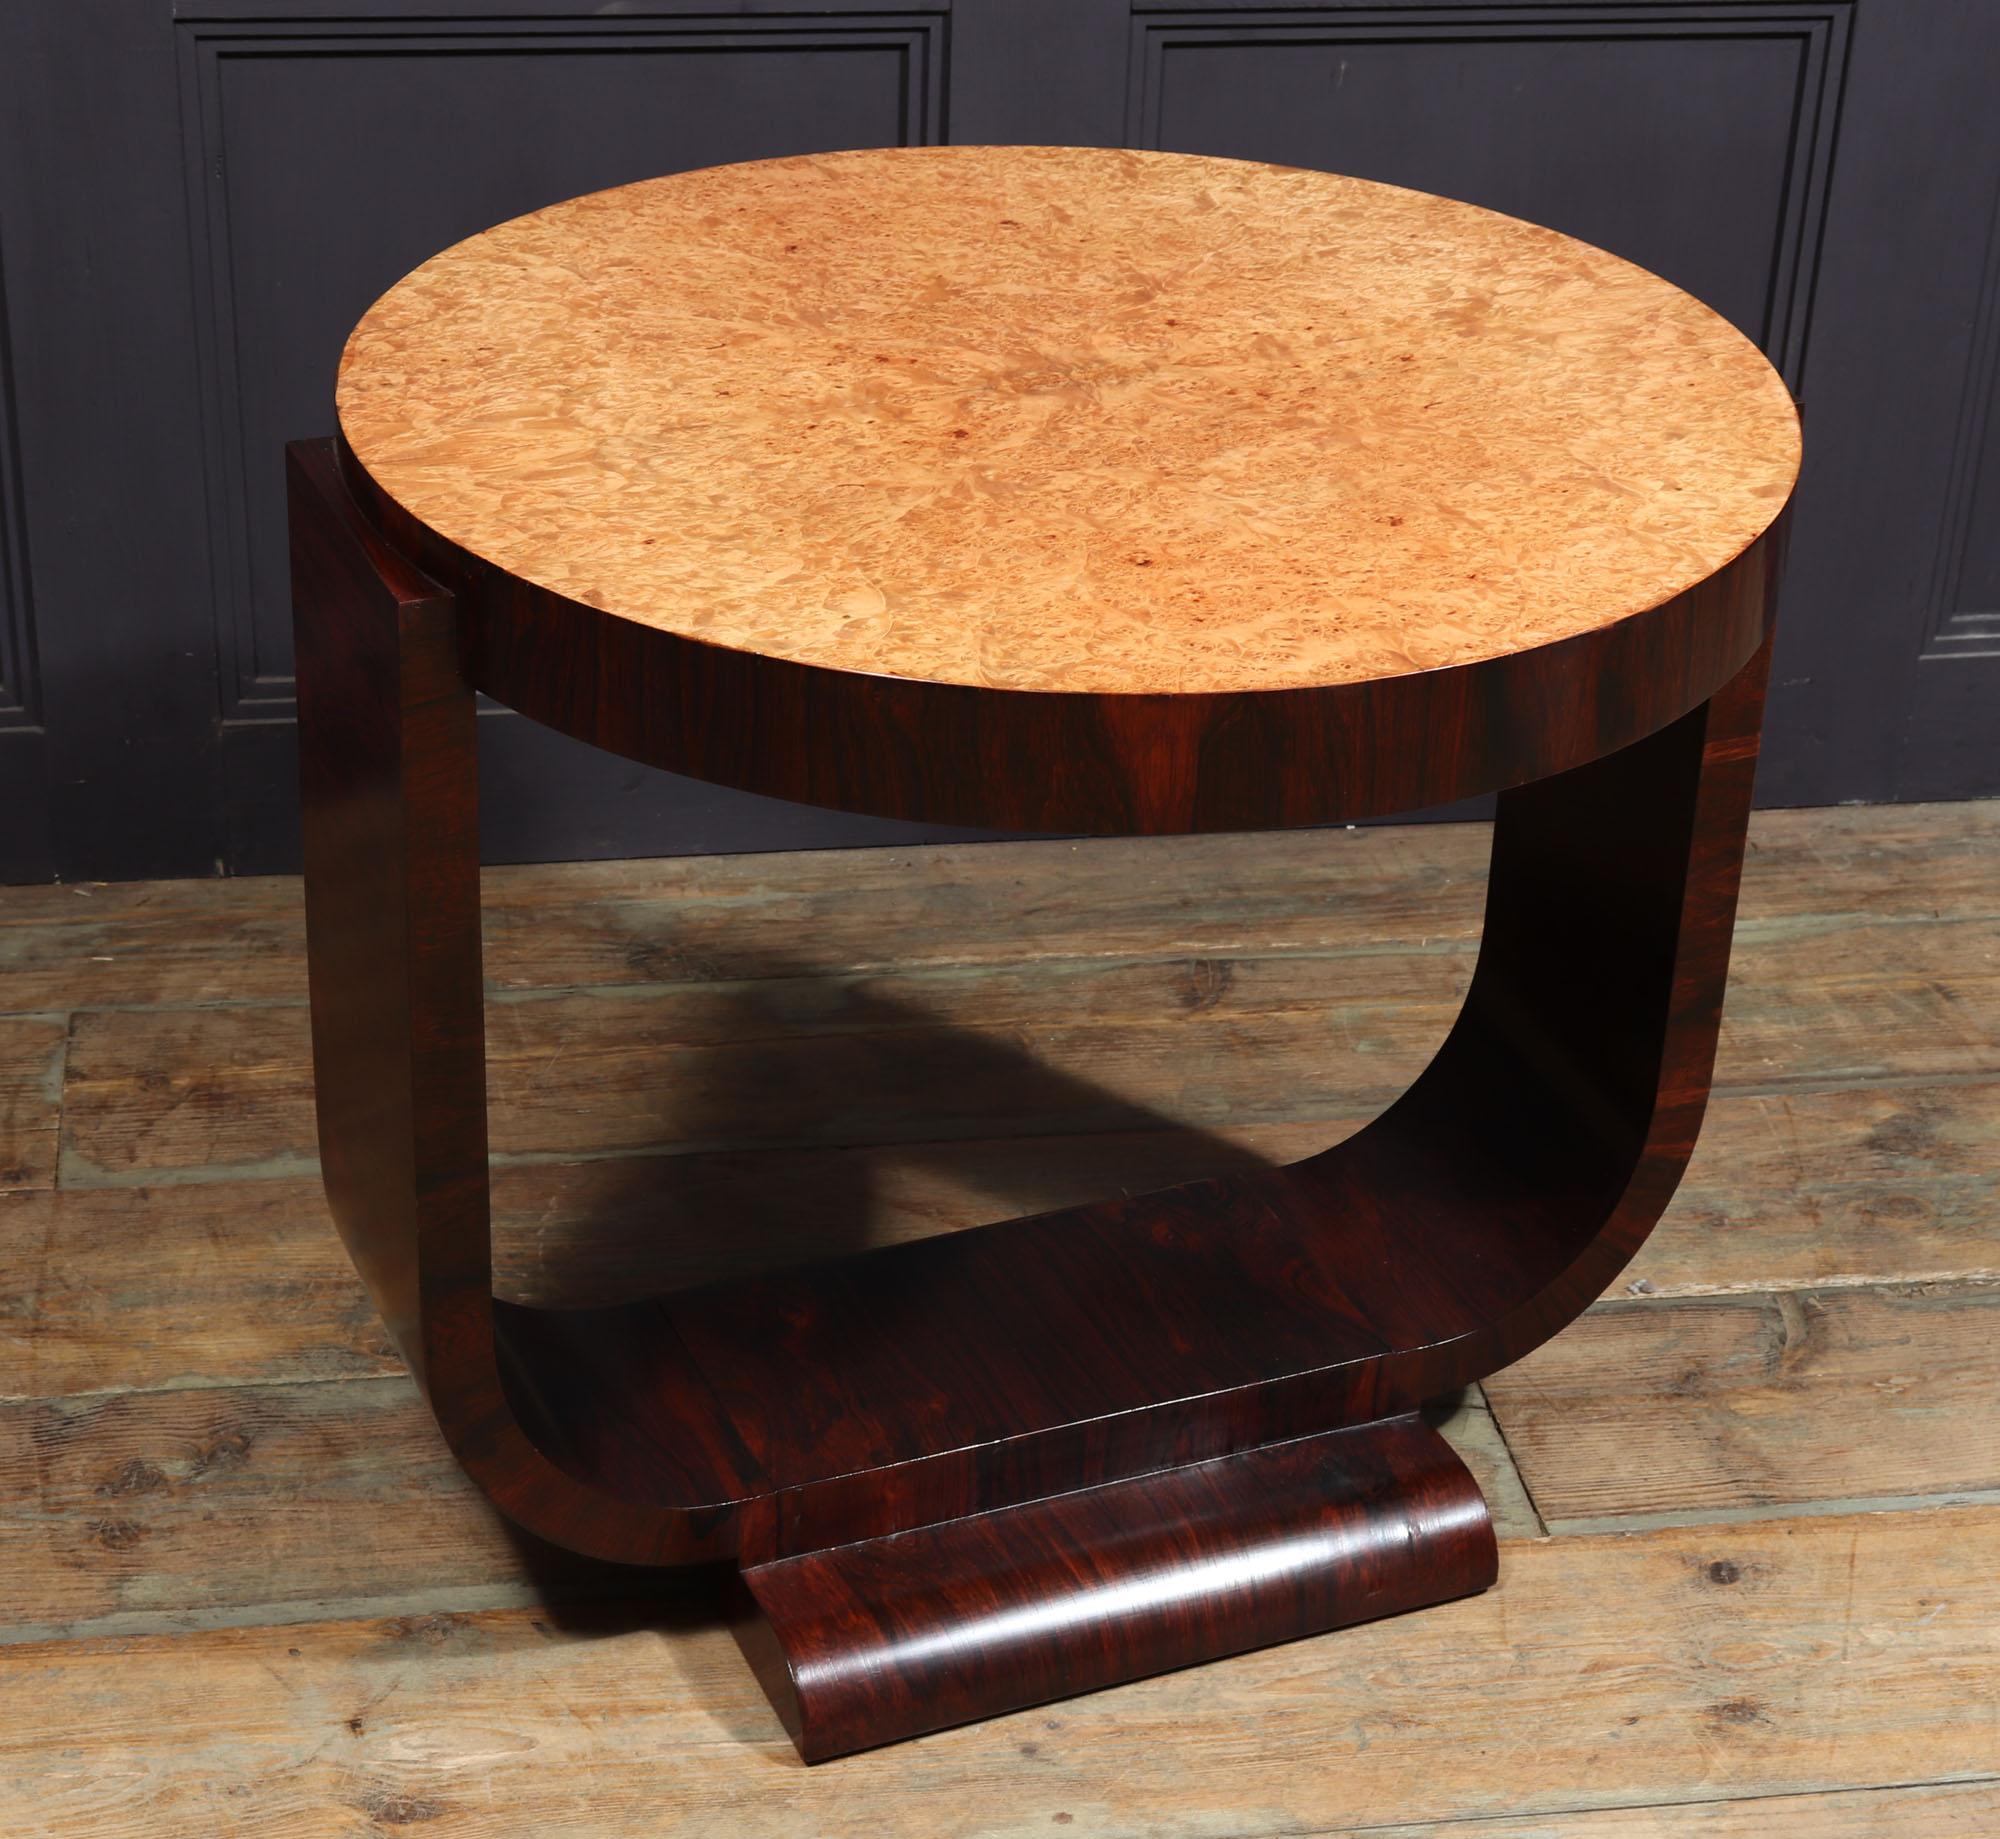 FRENCH ART DECO TABLE
An unusual French Art Deco u base coffee table in rosewood with burr maple top, the table has been carefully restored and fully polished by hand and is in excellent condition throughout

Age: 1930

Style: French Art